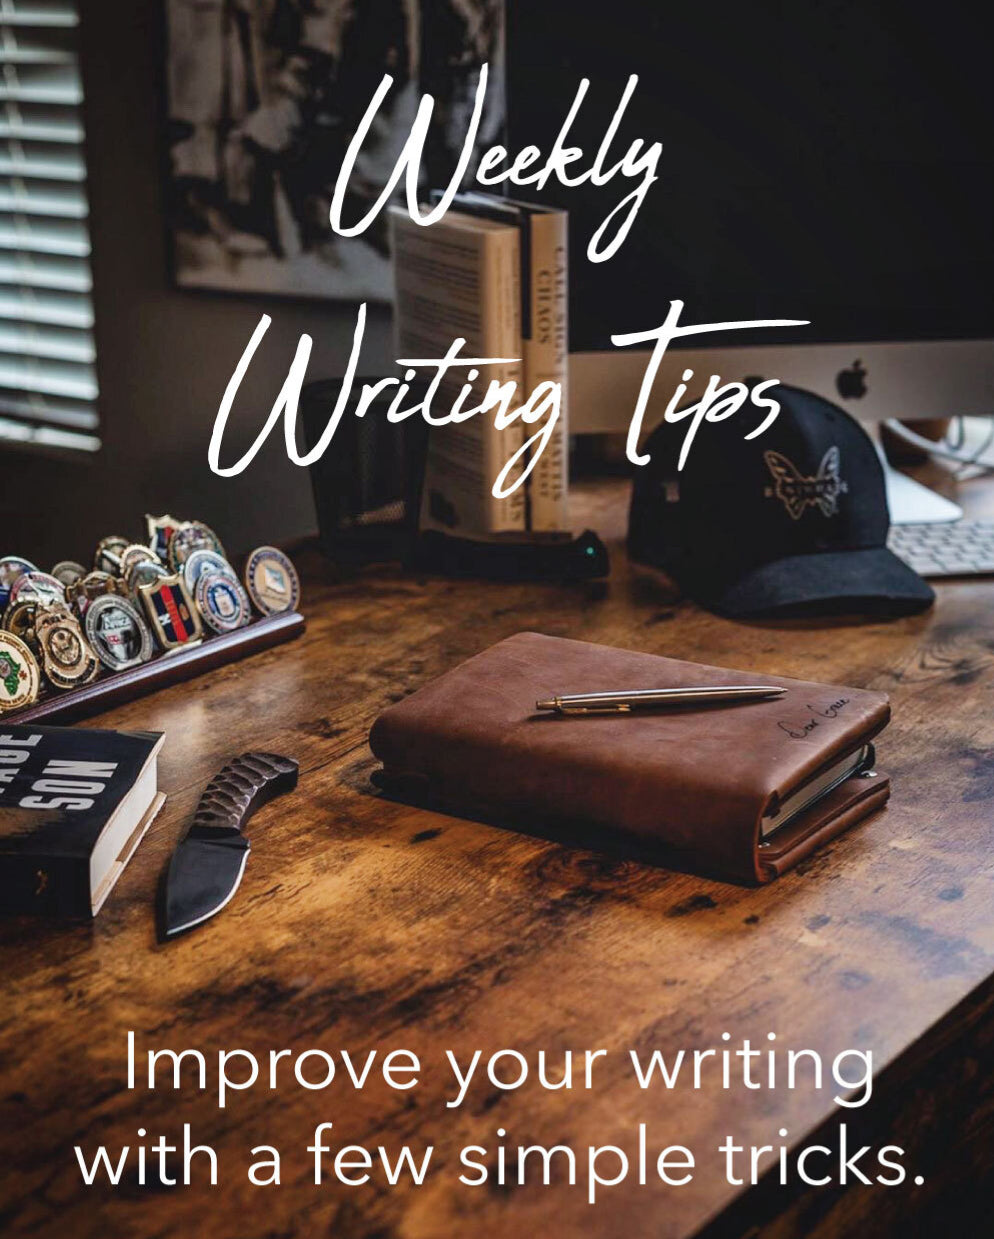 Weekly Writing Tips - Improve your writing with a few simple tricks. Pictured: Leather folio on desk with knife, bench made hat, medals, computer.